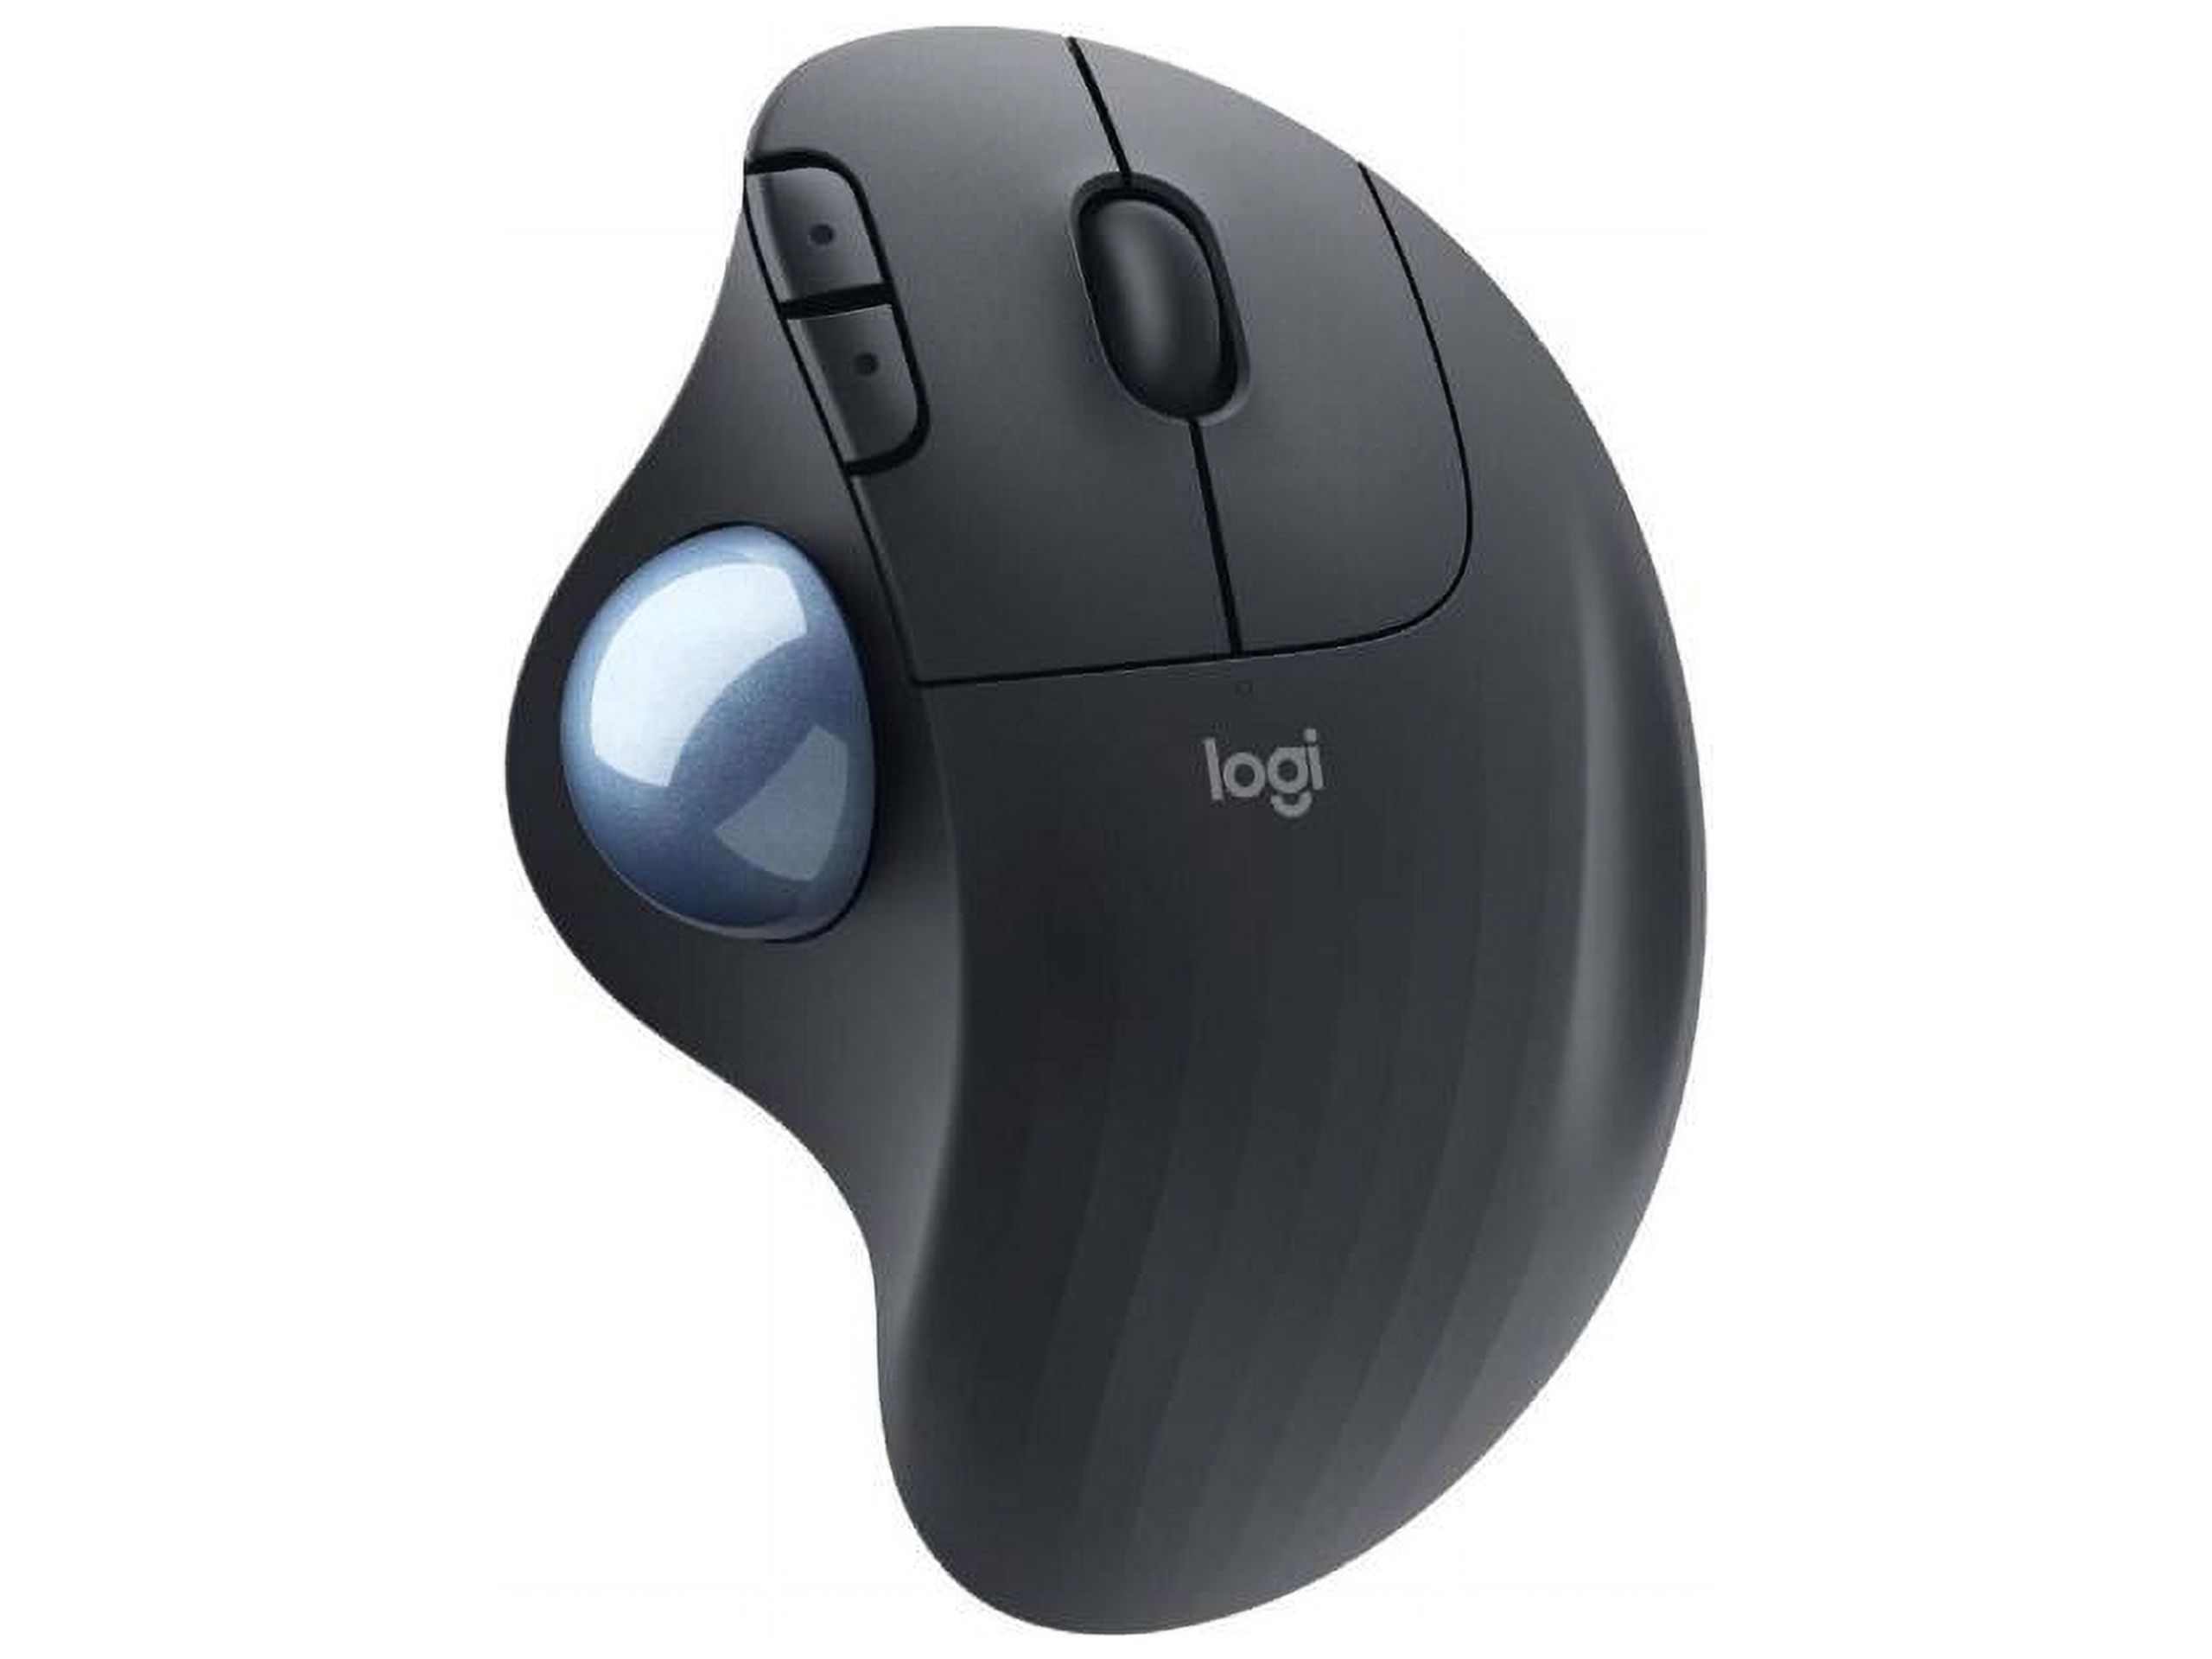 Logitech ERGO M575 Wireless Trackball Mouse - Easy thumb control, precision and smooth tracking, ergonomic comfort design, for Windows, PC and Mac with Bluetooth and USB capabilities (Black) - Opti... - image 1 of 20